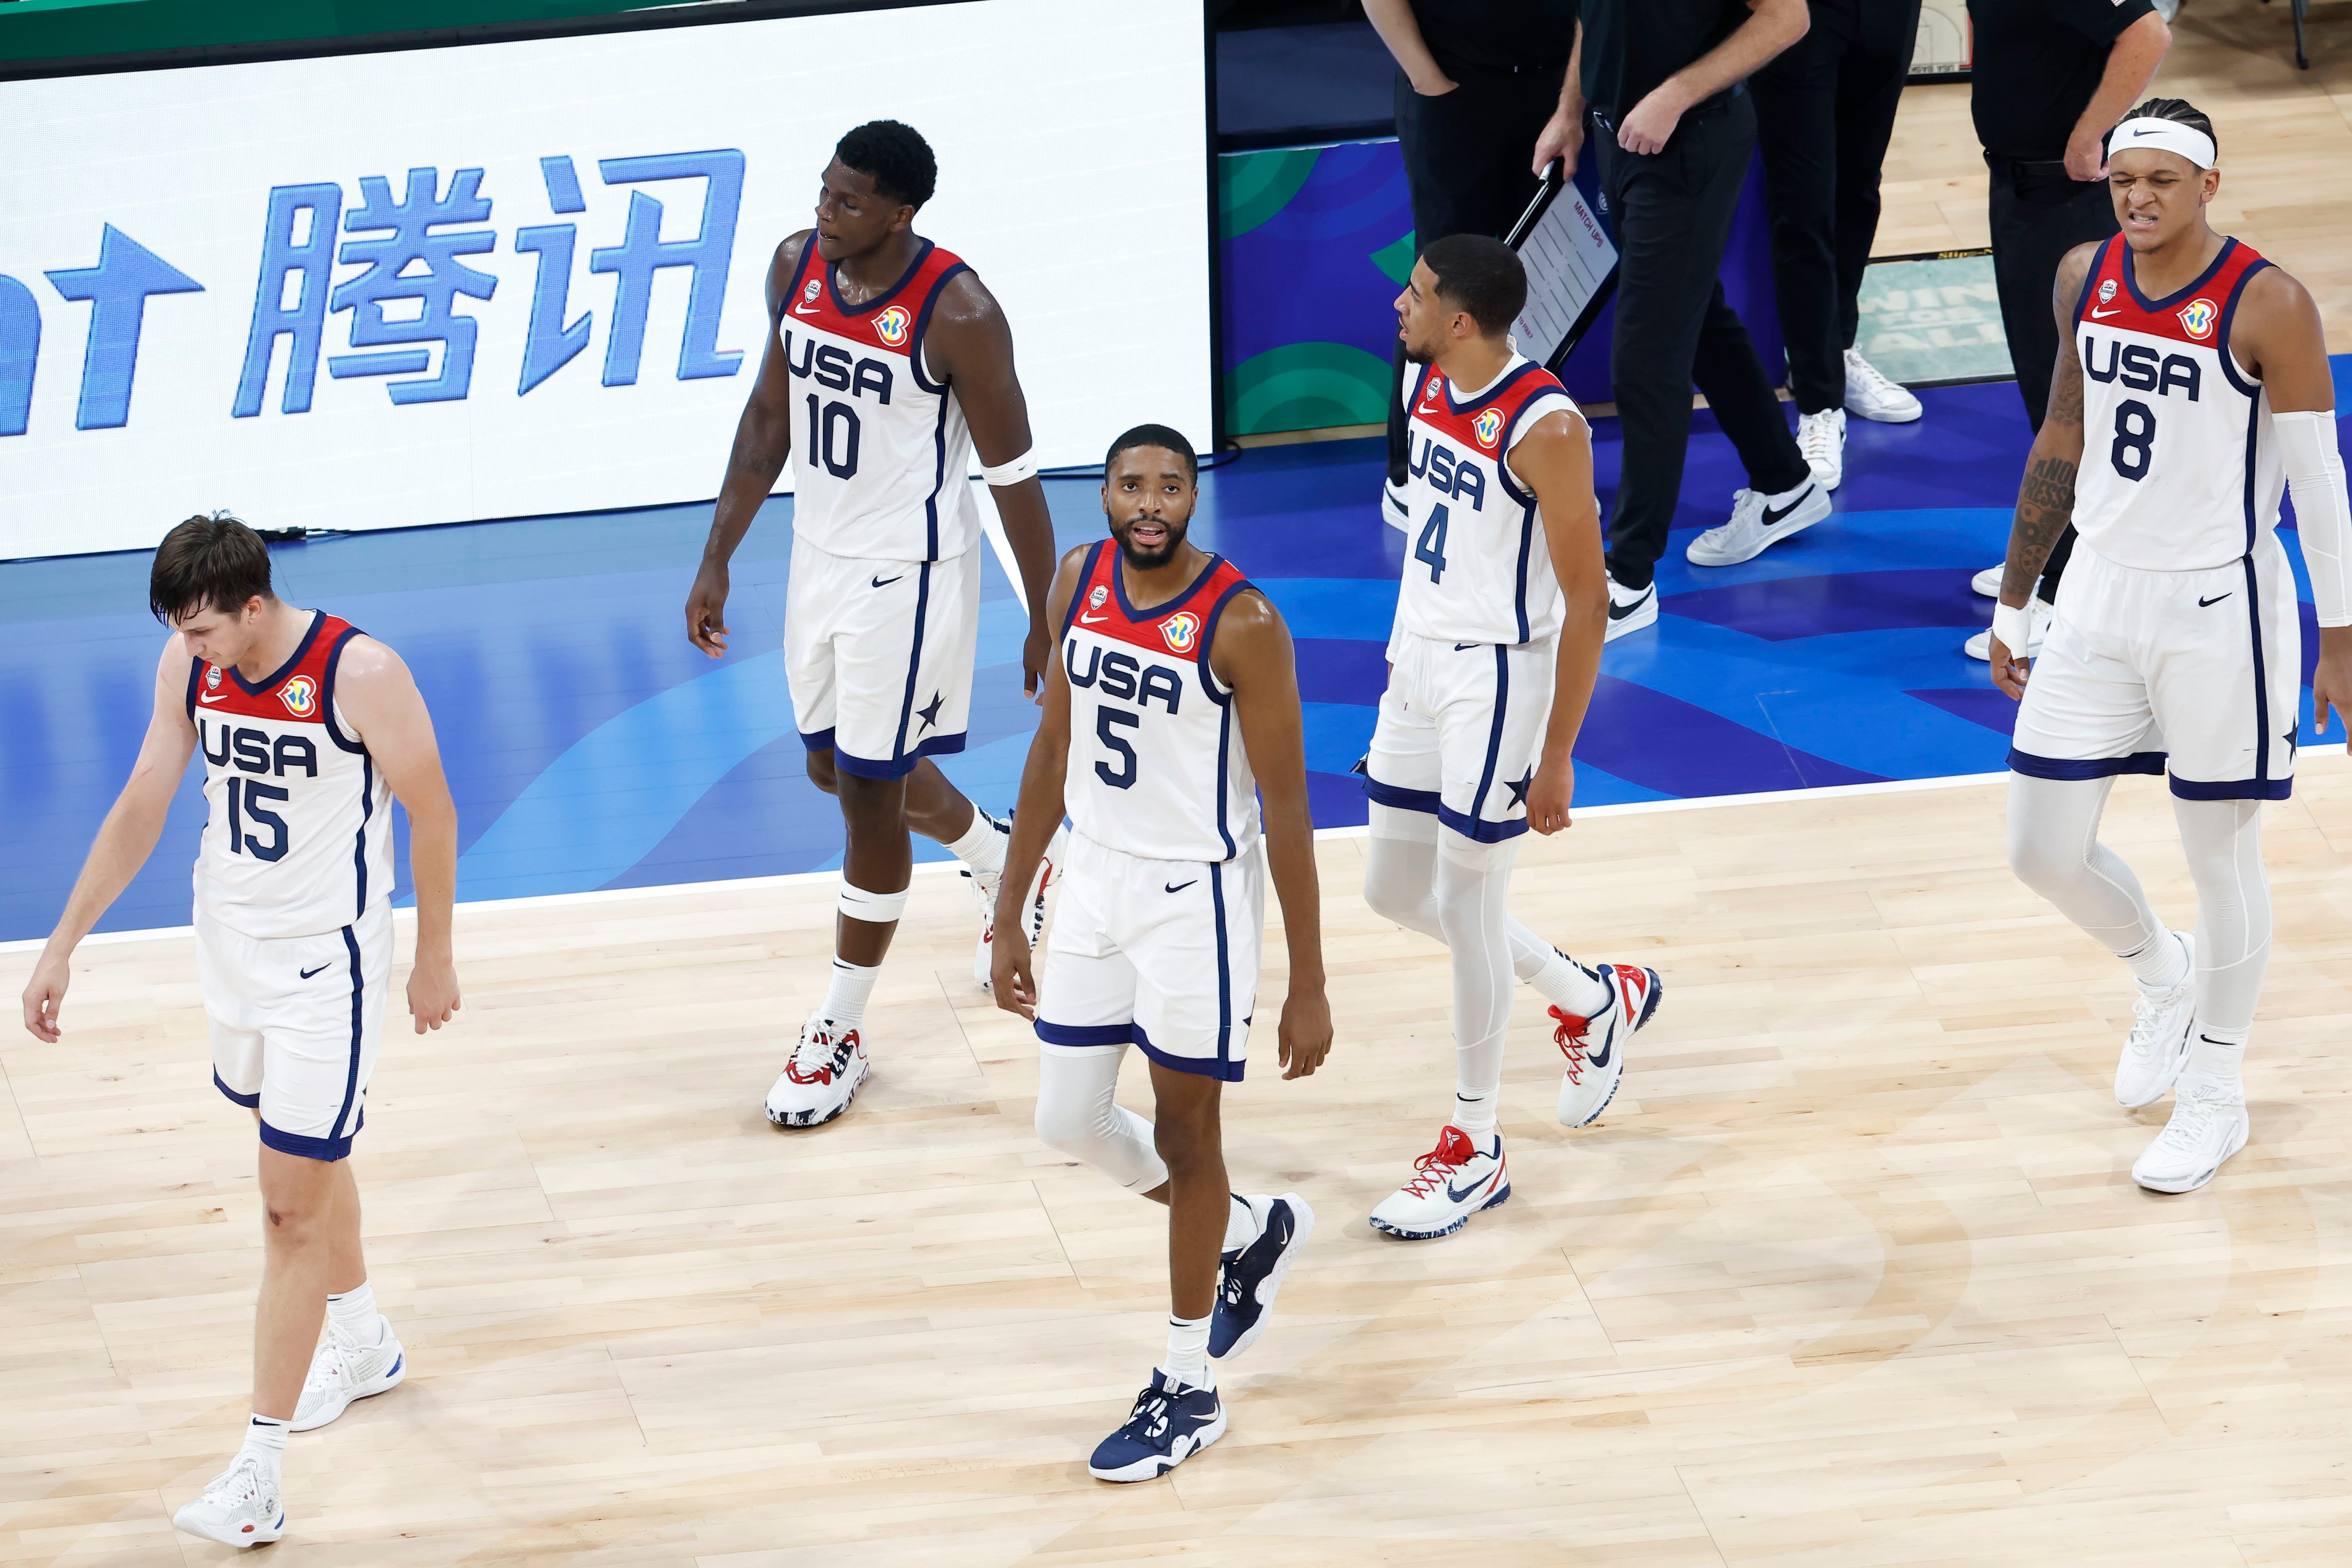 Hello and welcome to USA vs Canada at the 2023 FIBA Basketball World Cup!